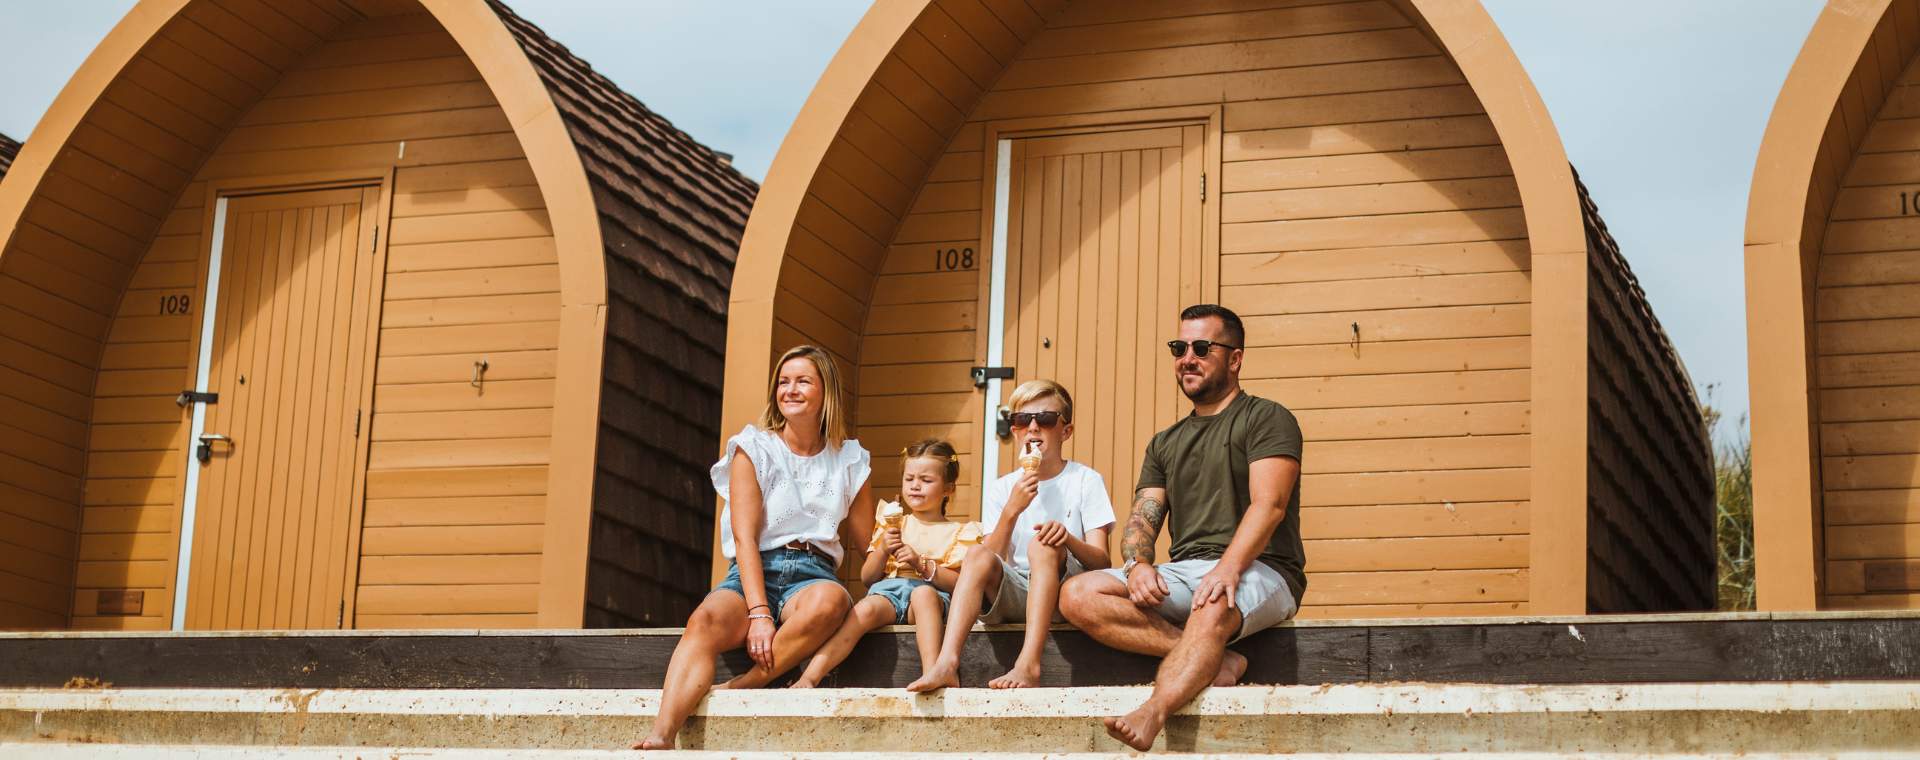 A family sat in front of the beach chalets in Bridlington, East Yorkshire enjoying an ice cream